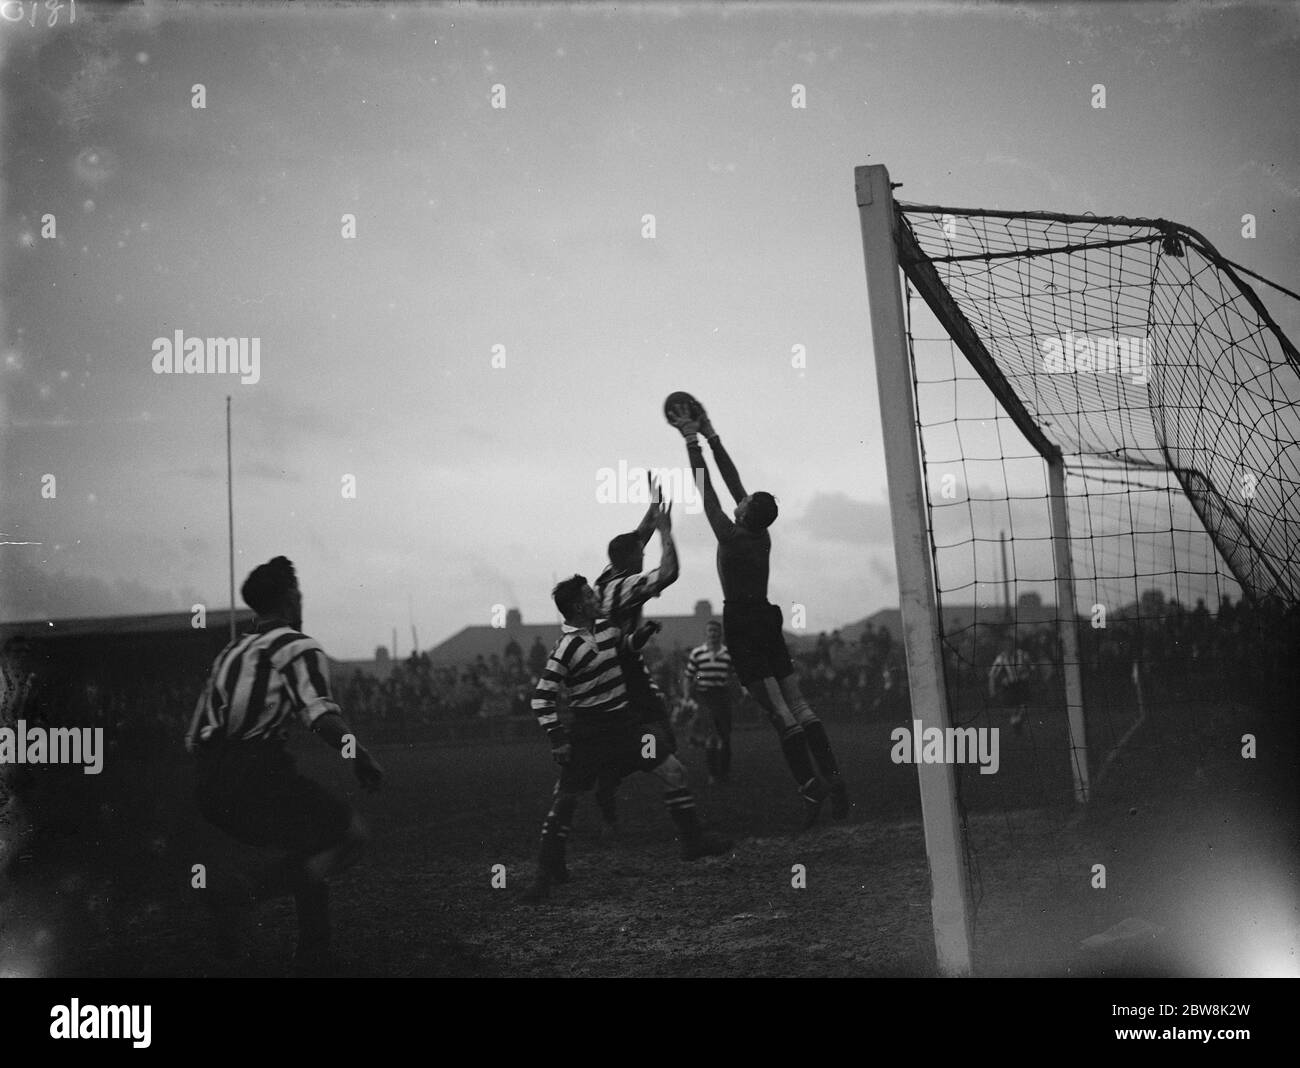 A goalkeeper catches the ball while under pressure from the attackers . 1935 Stock Photo